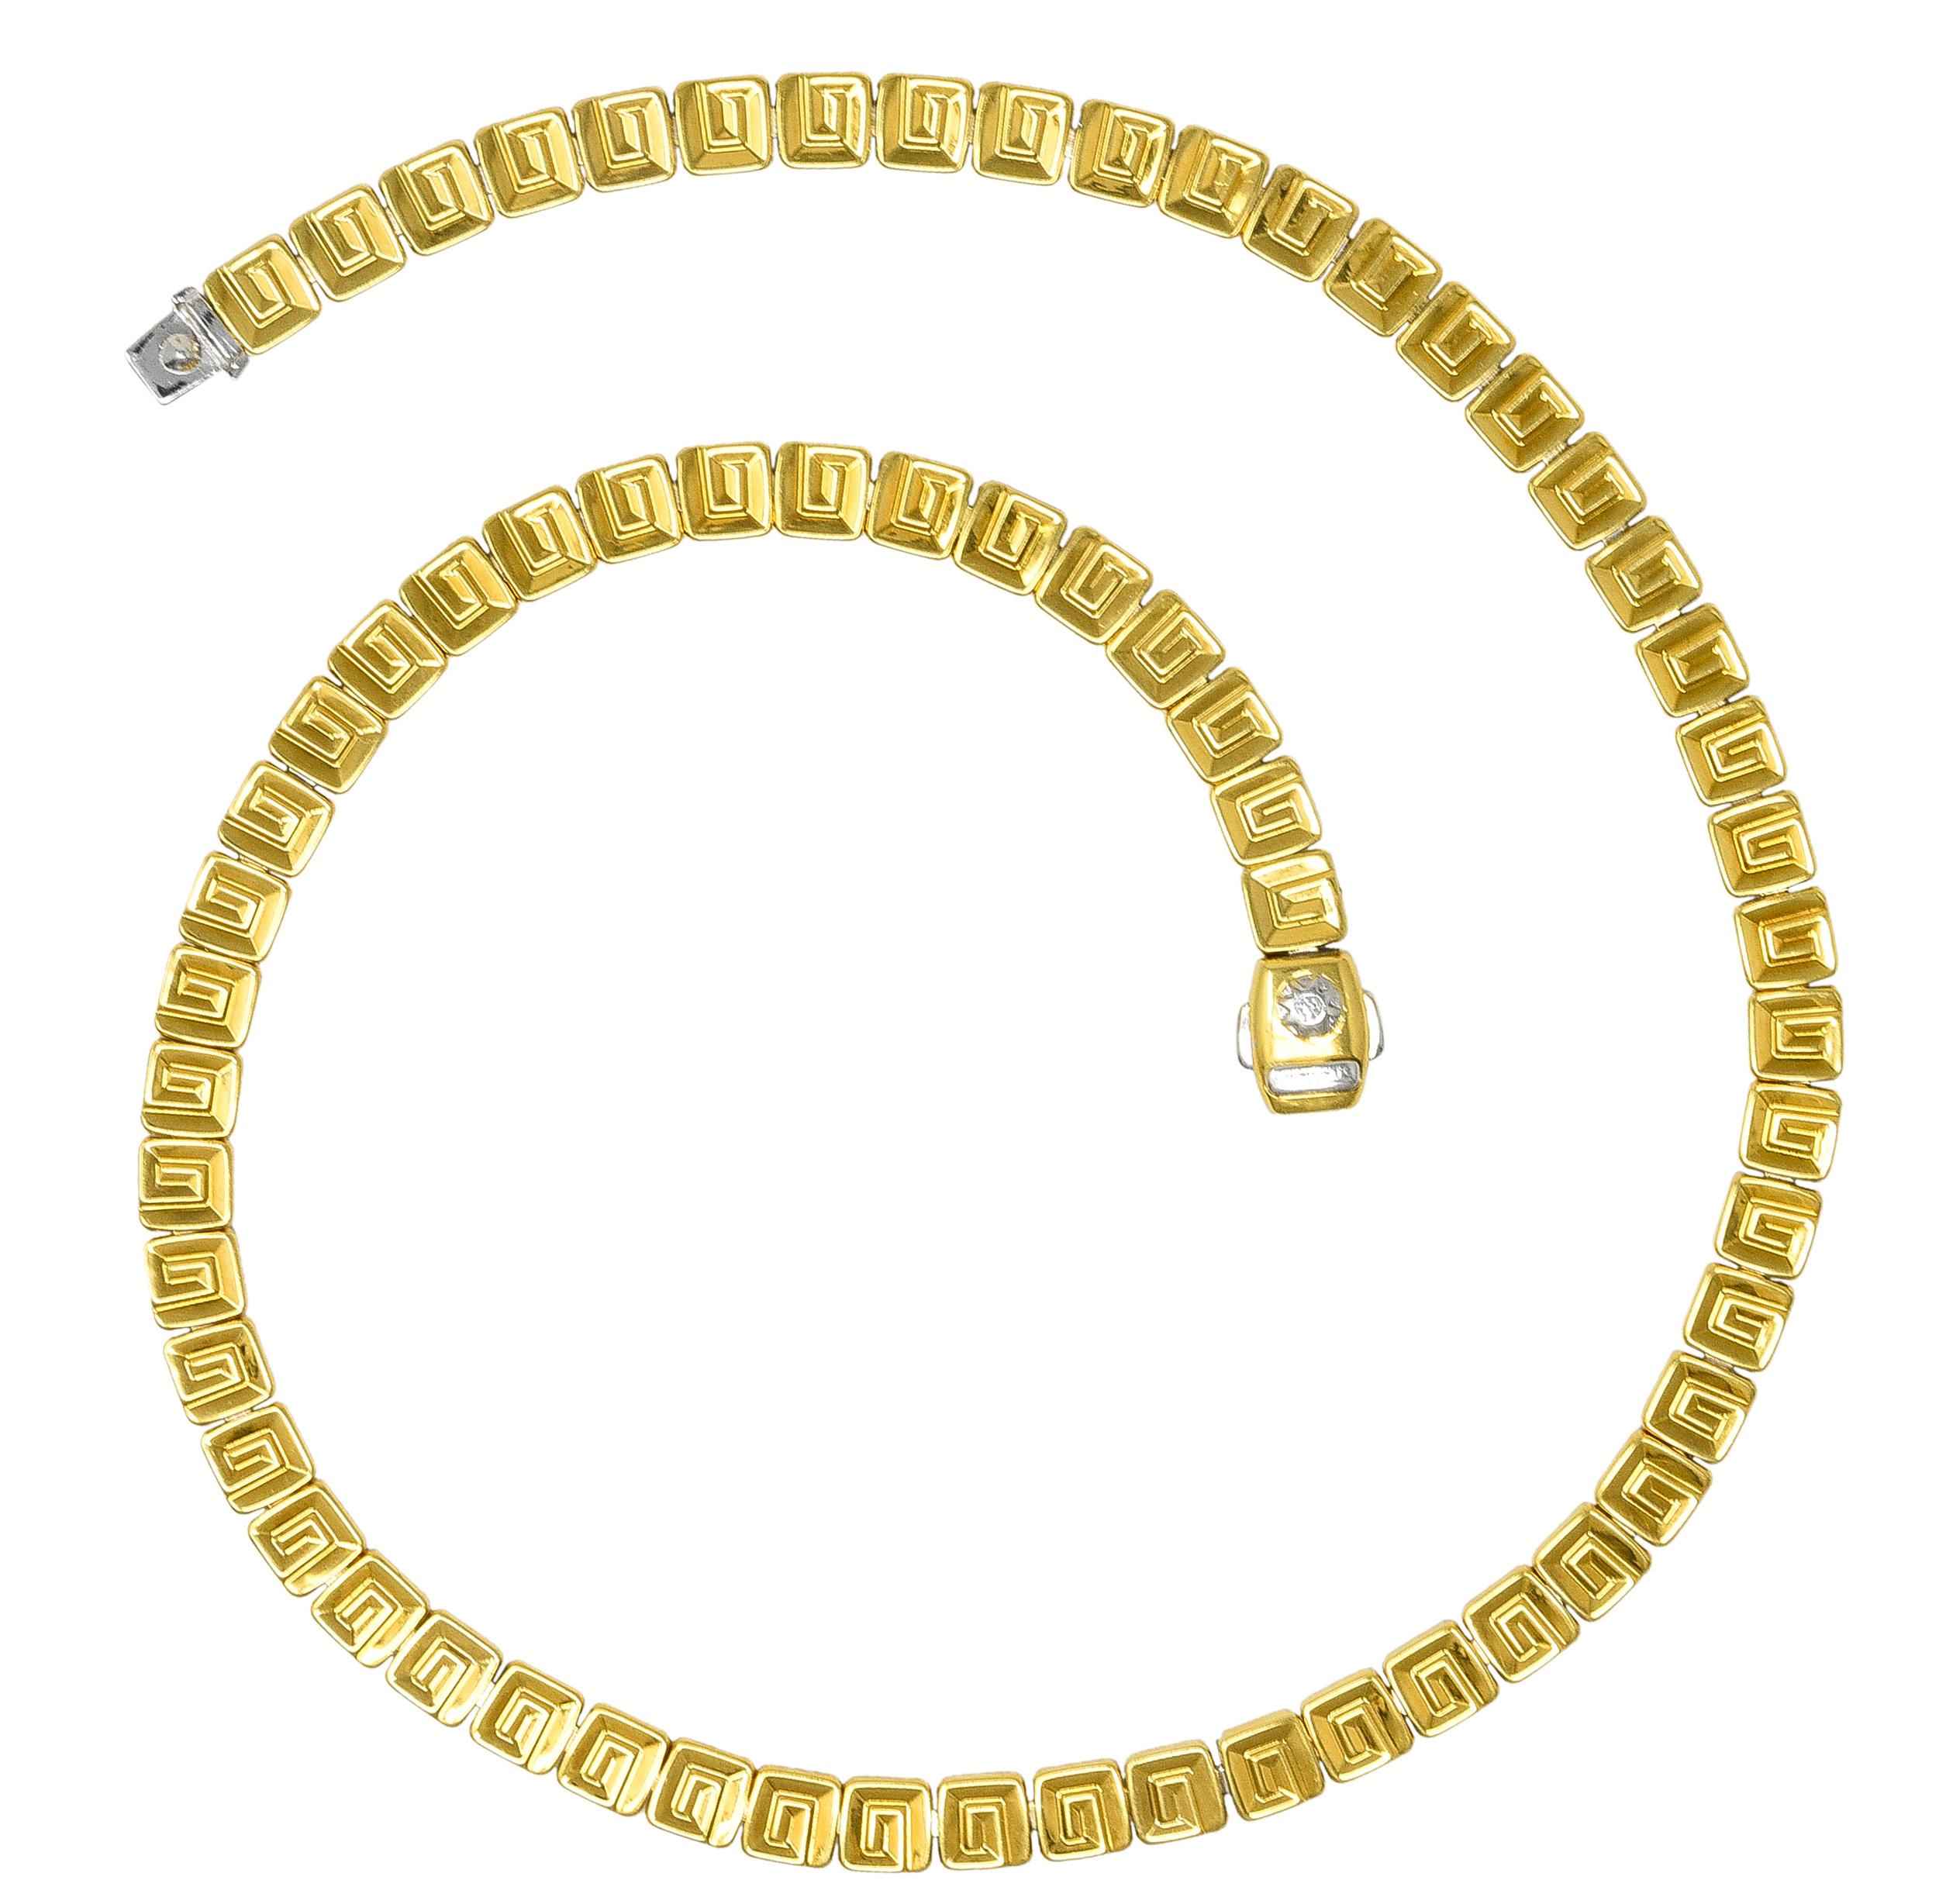 Designed as hinged square links - reversible with yellow gold on one side and white gold on the other. White gold side features an alternating pattern of linear and geometric motif links. Yellow gold side features a grooved Greek key motif. High